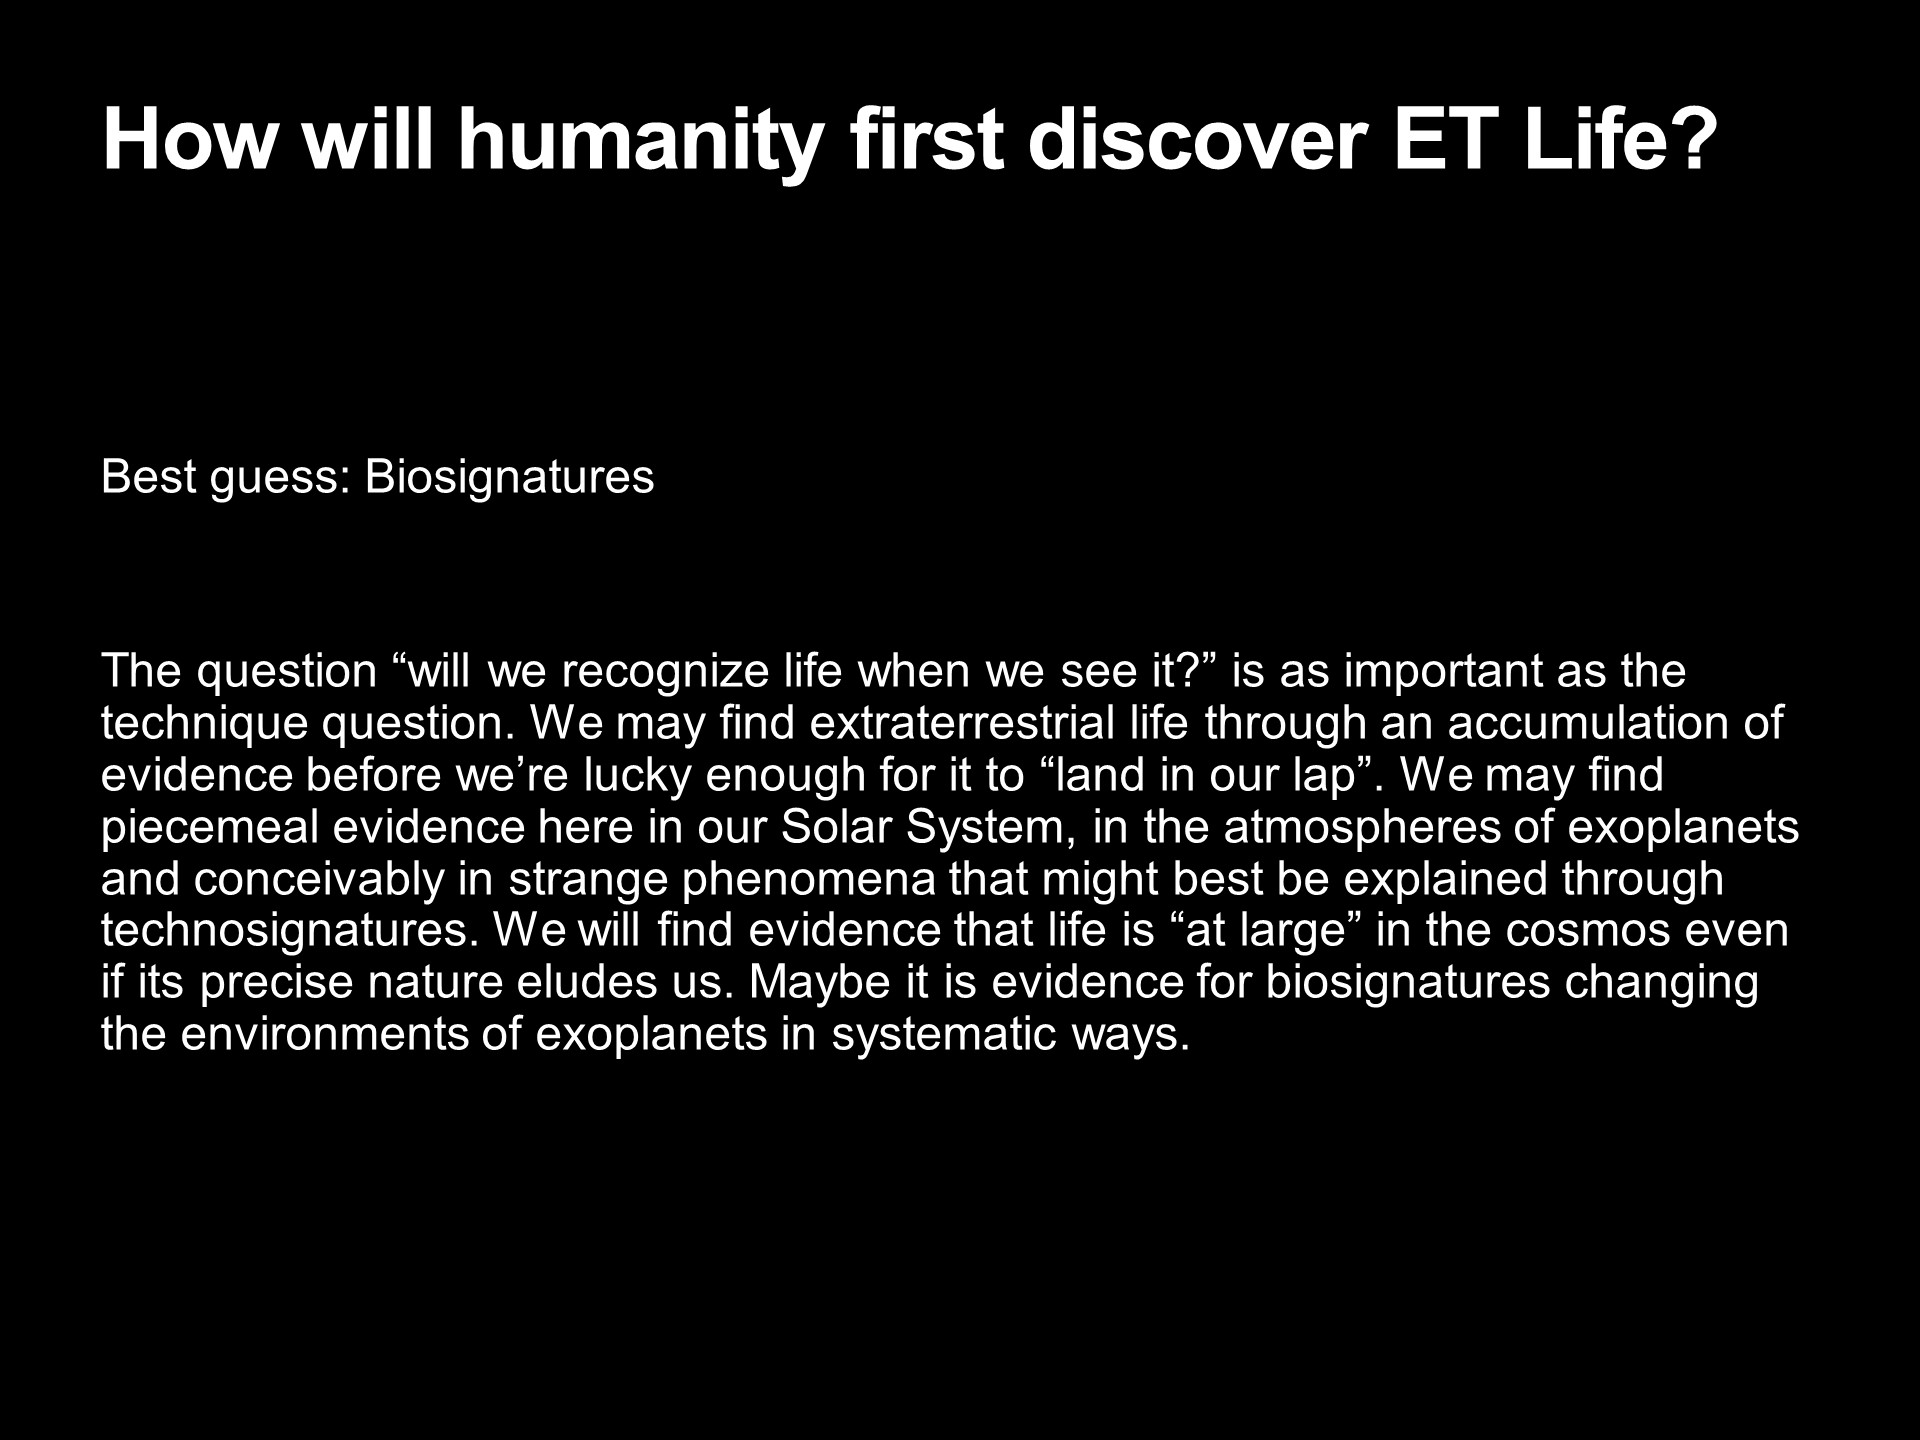 How will humanity first discover ET Life?
Best guess: Biosignatures 
The question will we recognize life when we see it? 
is as important as the technique question. We may find 
extraterrestrial life through an accumulation of evidence 
before were lucky enough for it to land in our lap. 
We may find piecemeal evidence here in our Solar System, 
in the atmospheres of exoplanets and conceivably in 
strange phenomena that might best be explained through 
technosignatures. We will find evidence that life is 
at large in the cosmos even if its precise nature eludes us. 
Maybe it is evidence for biosignatures changing the 
environments of exoplanets in systematic ways.